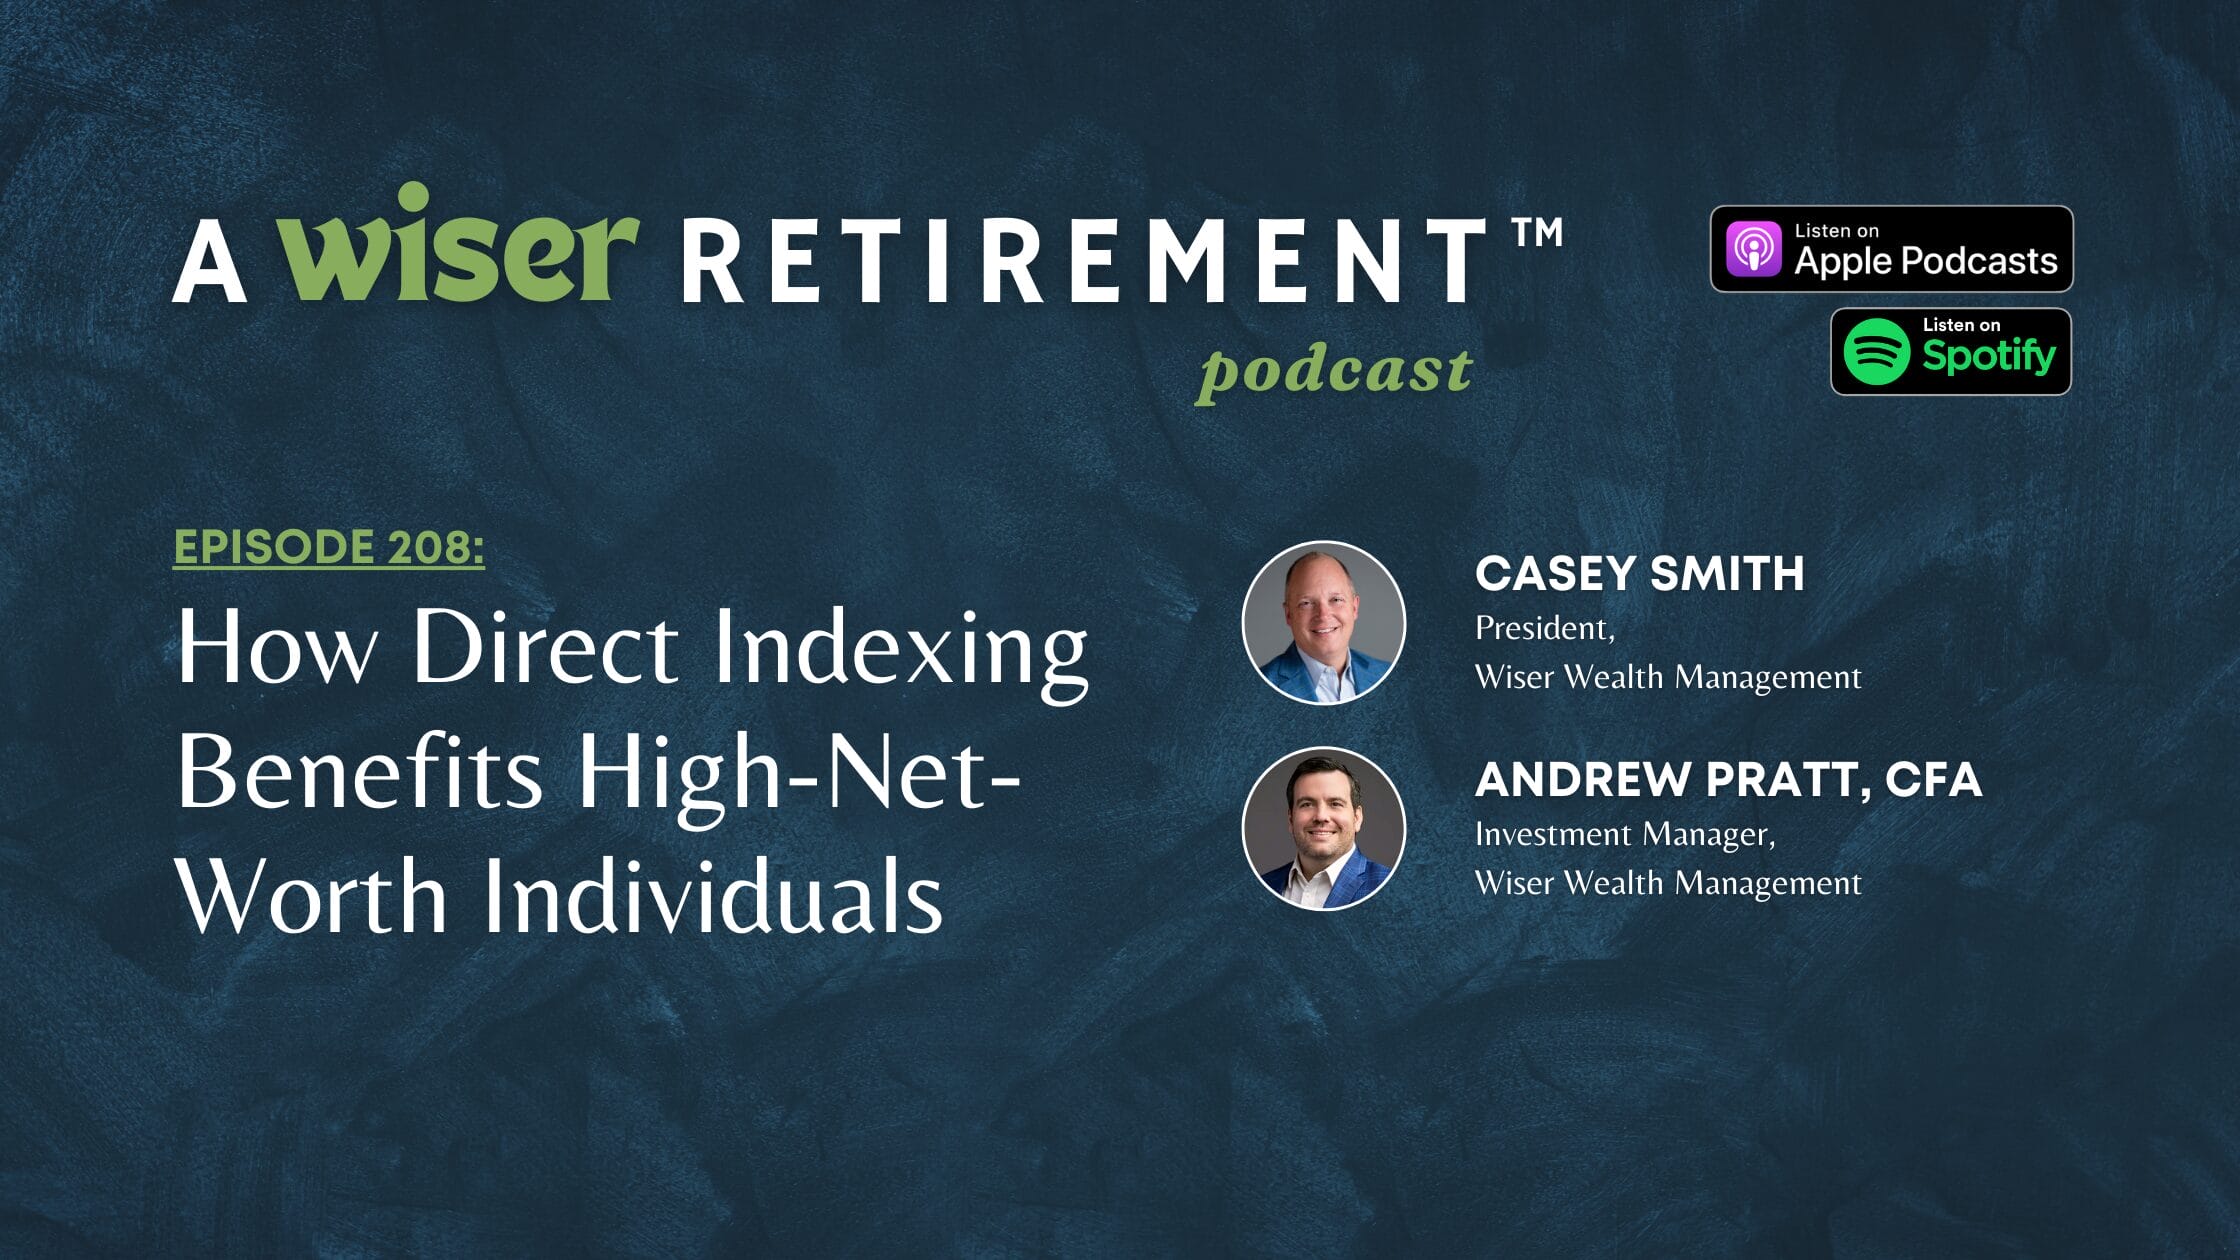 How Direct Indexing Benefits High-Net-Worth Individuals